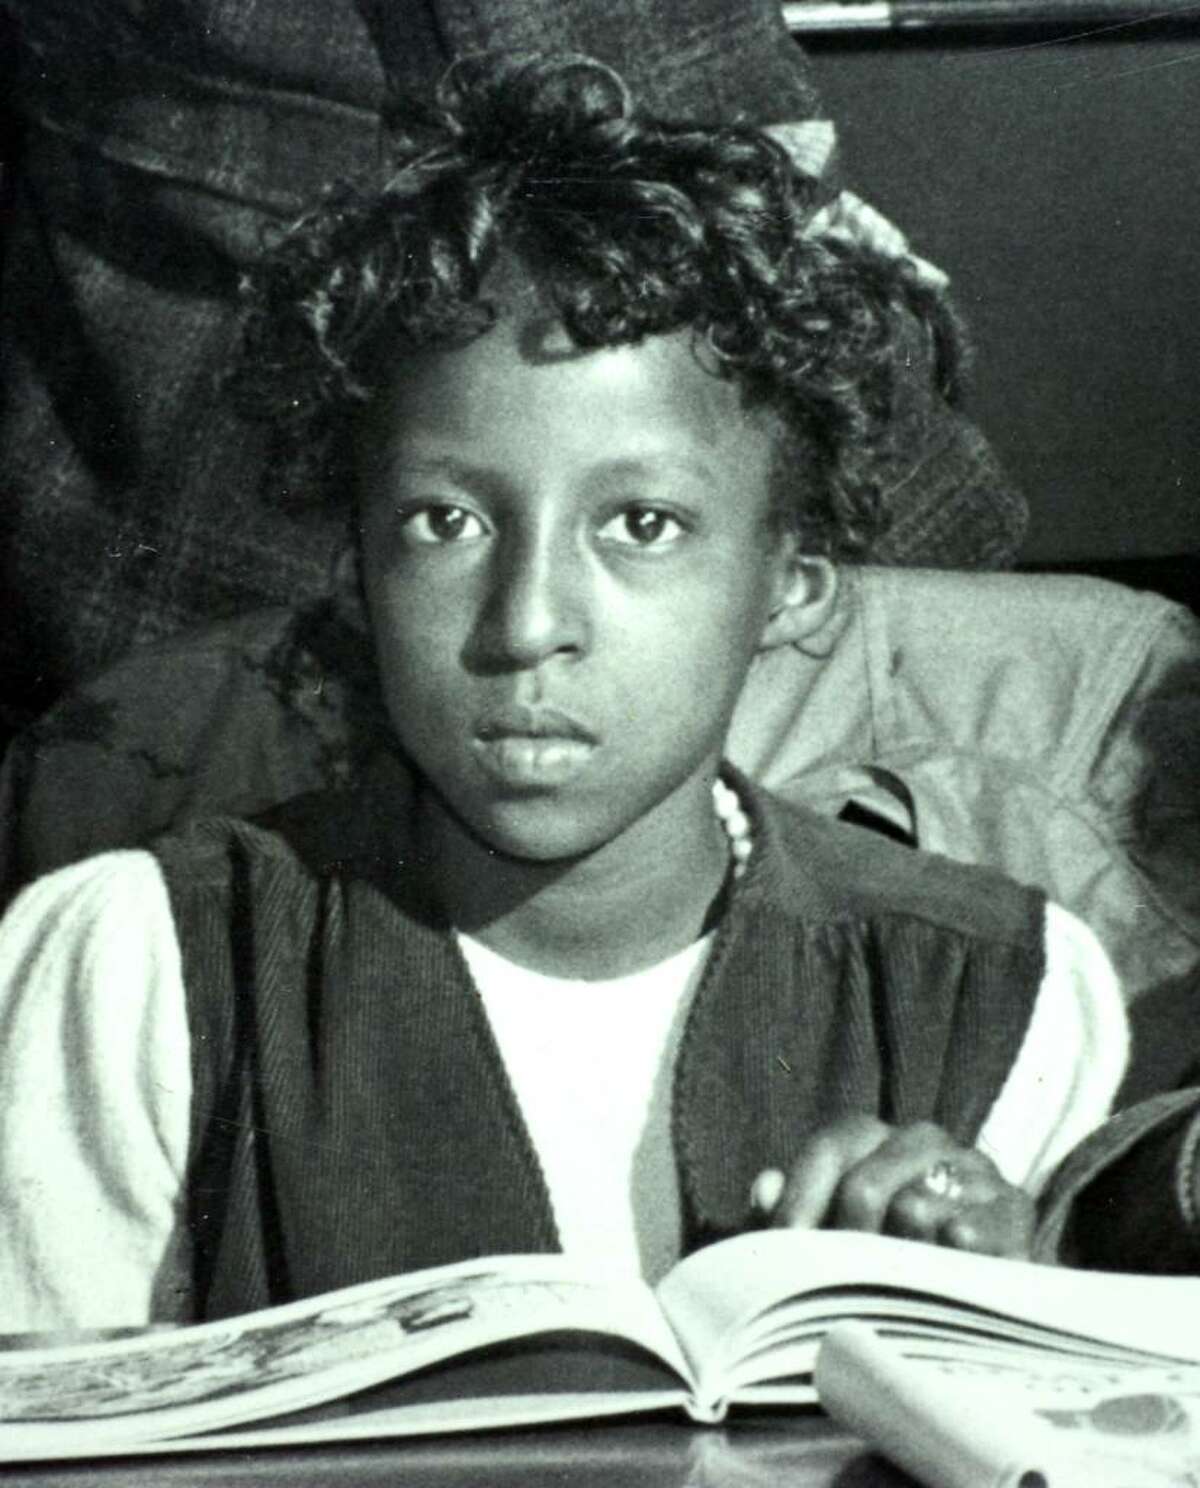 In a detail taken from a vintage photograph from 1944, belonging to the Historic Collections of the Bridgeport Public Library, Louise Dent, of Bridgeport, can be clearly recognized. At the time of this photo, Dent was an 11-year old school girl, taking part in a National Book Week event at the library.